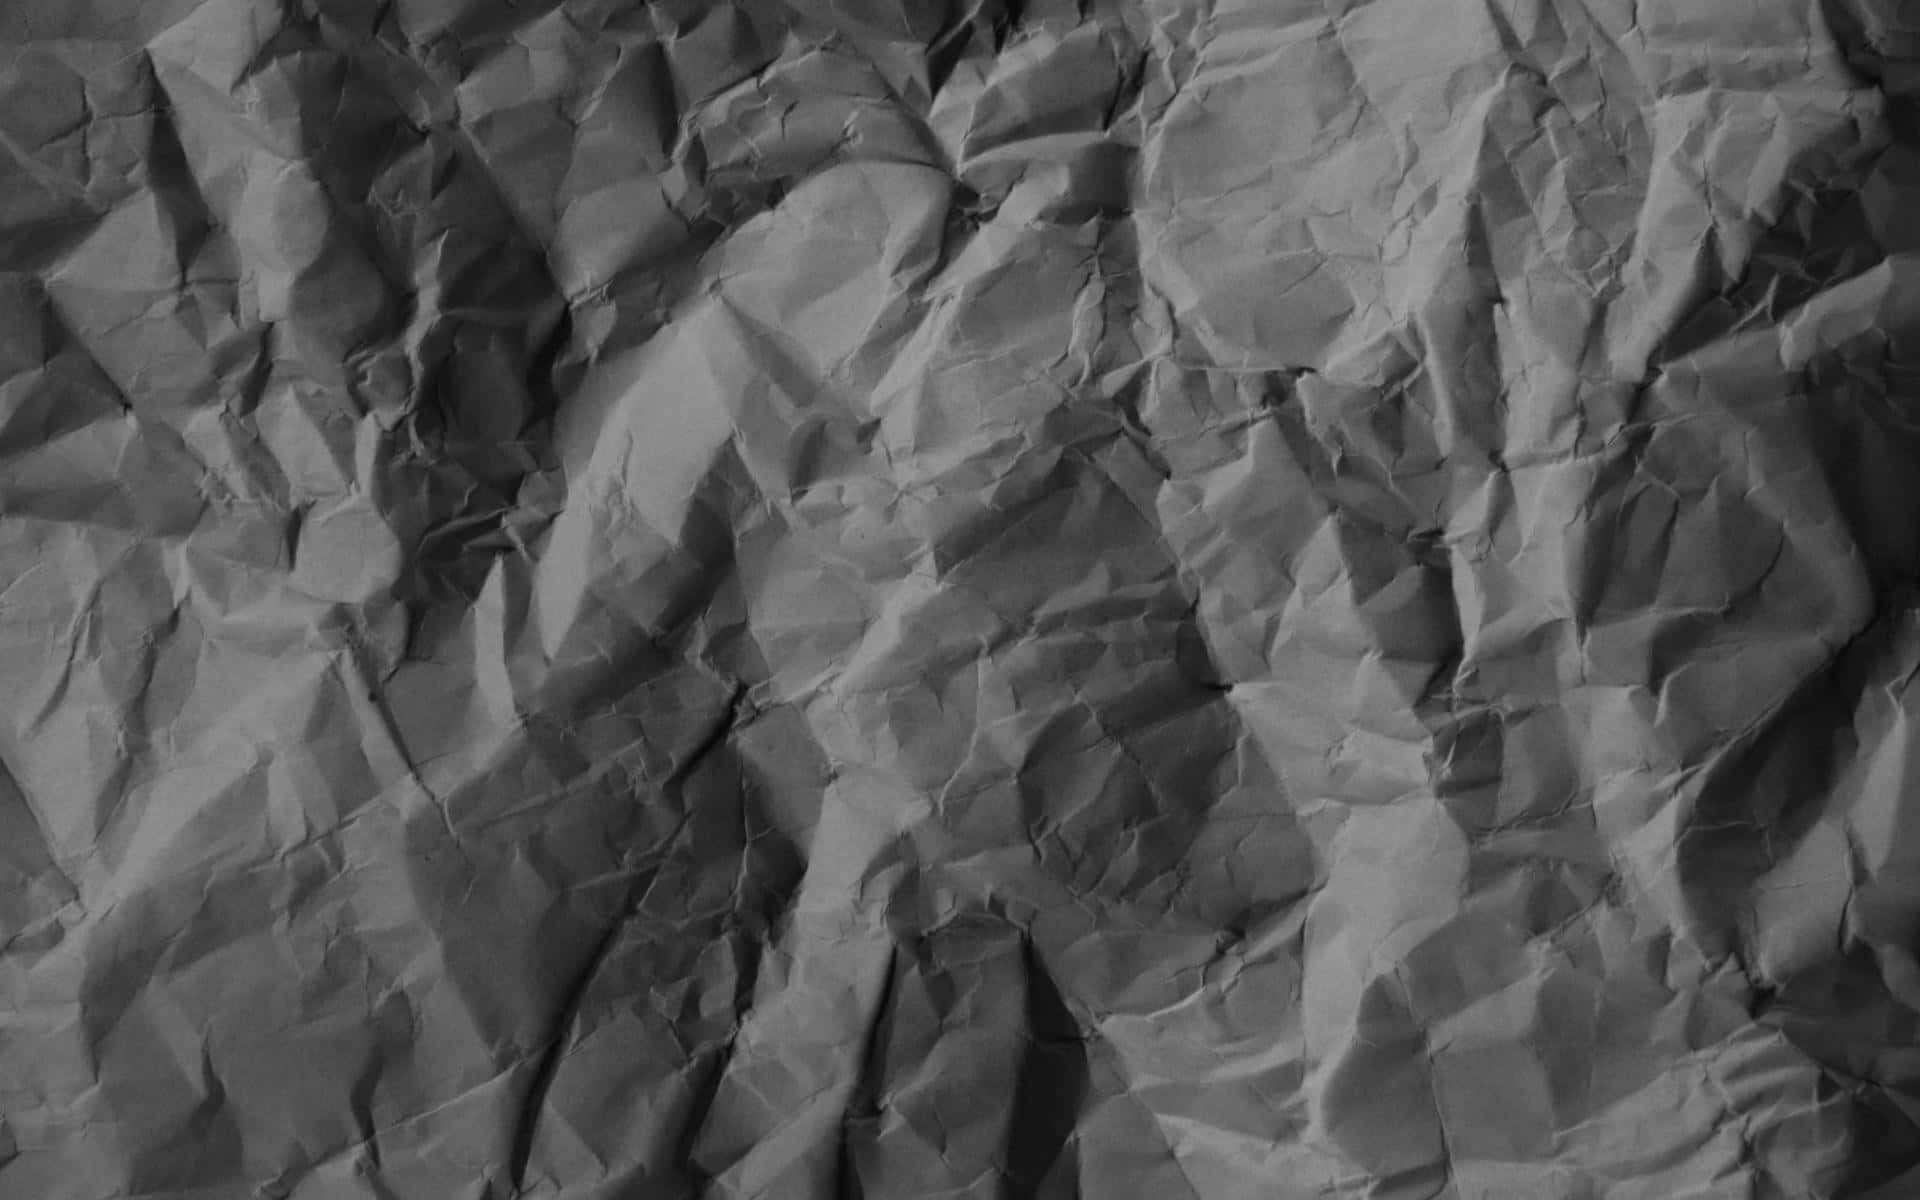 A Black And White Image Of Crumpled Paper